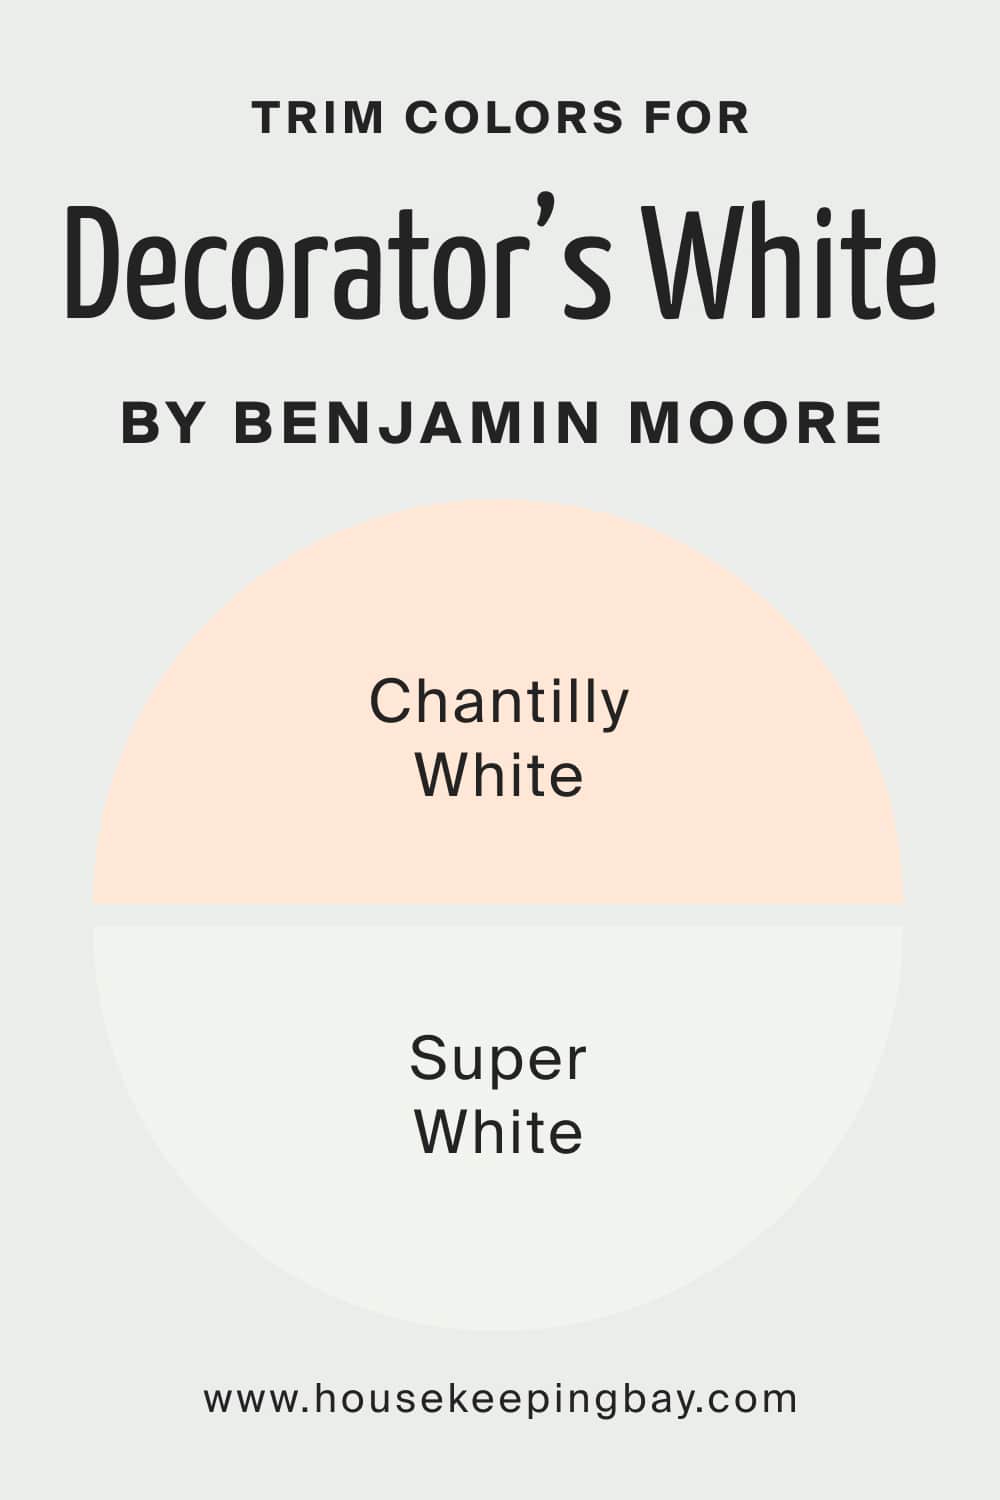 Trim Colors for Decorator’s White CC 20 by Benjamin Moore